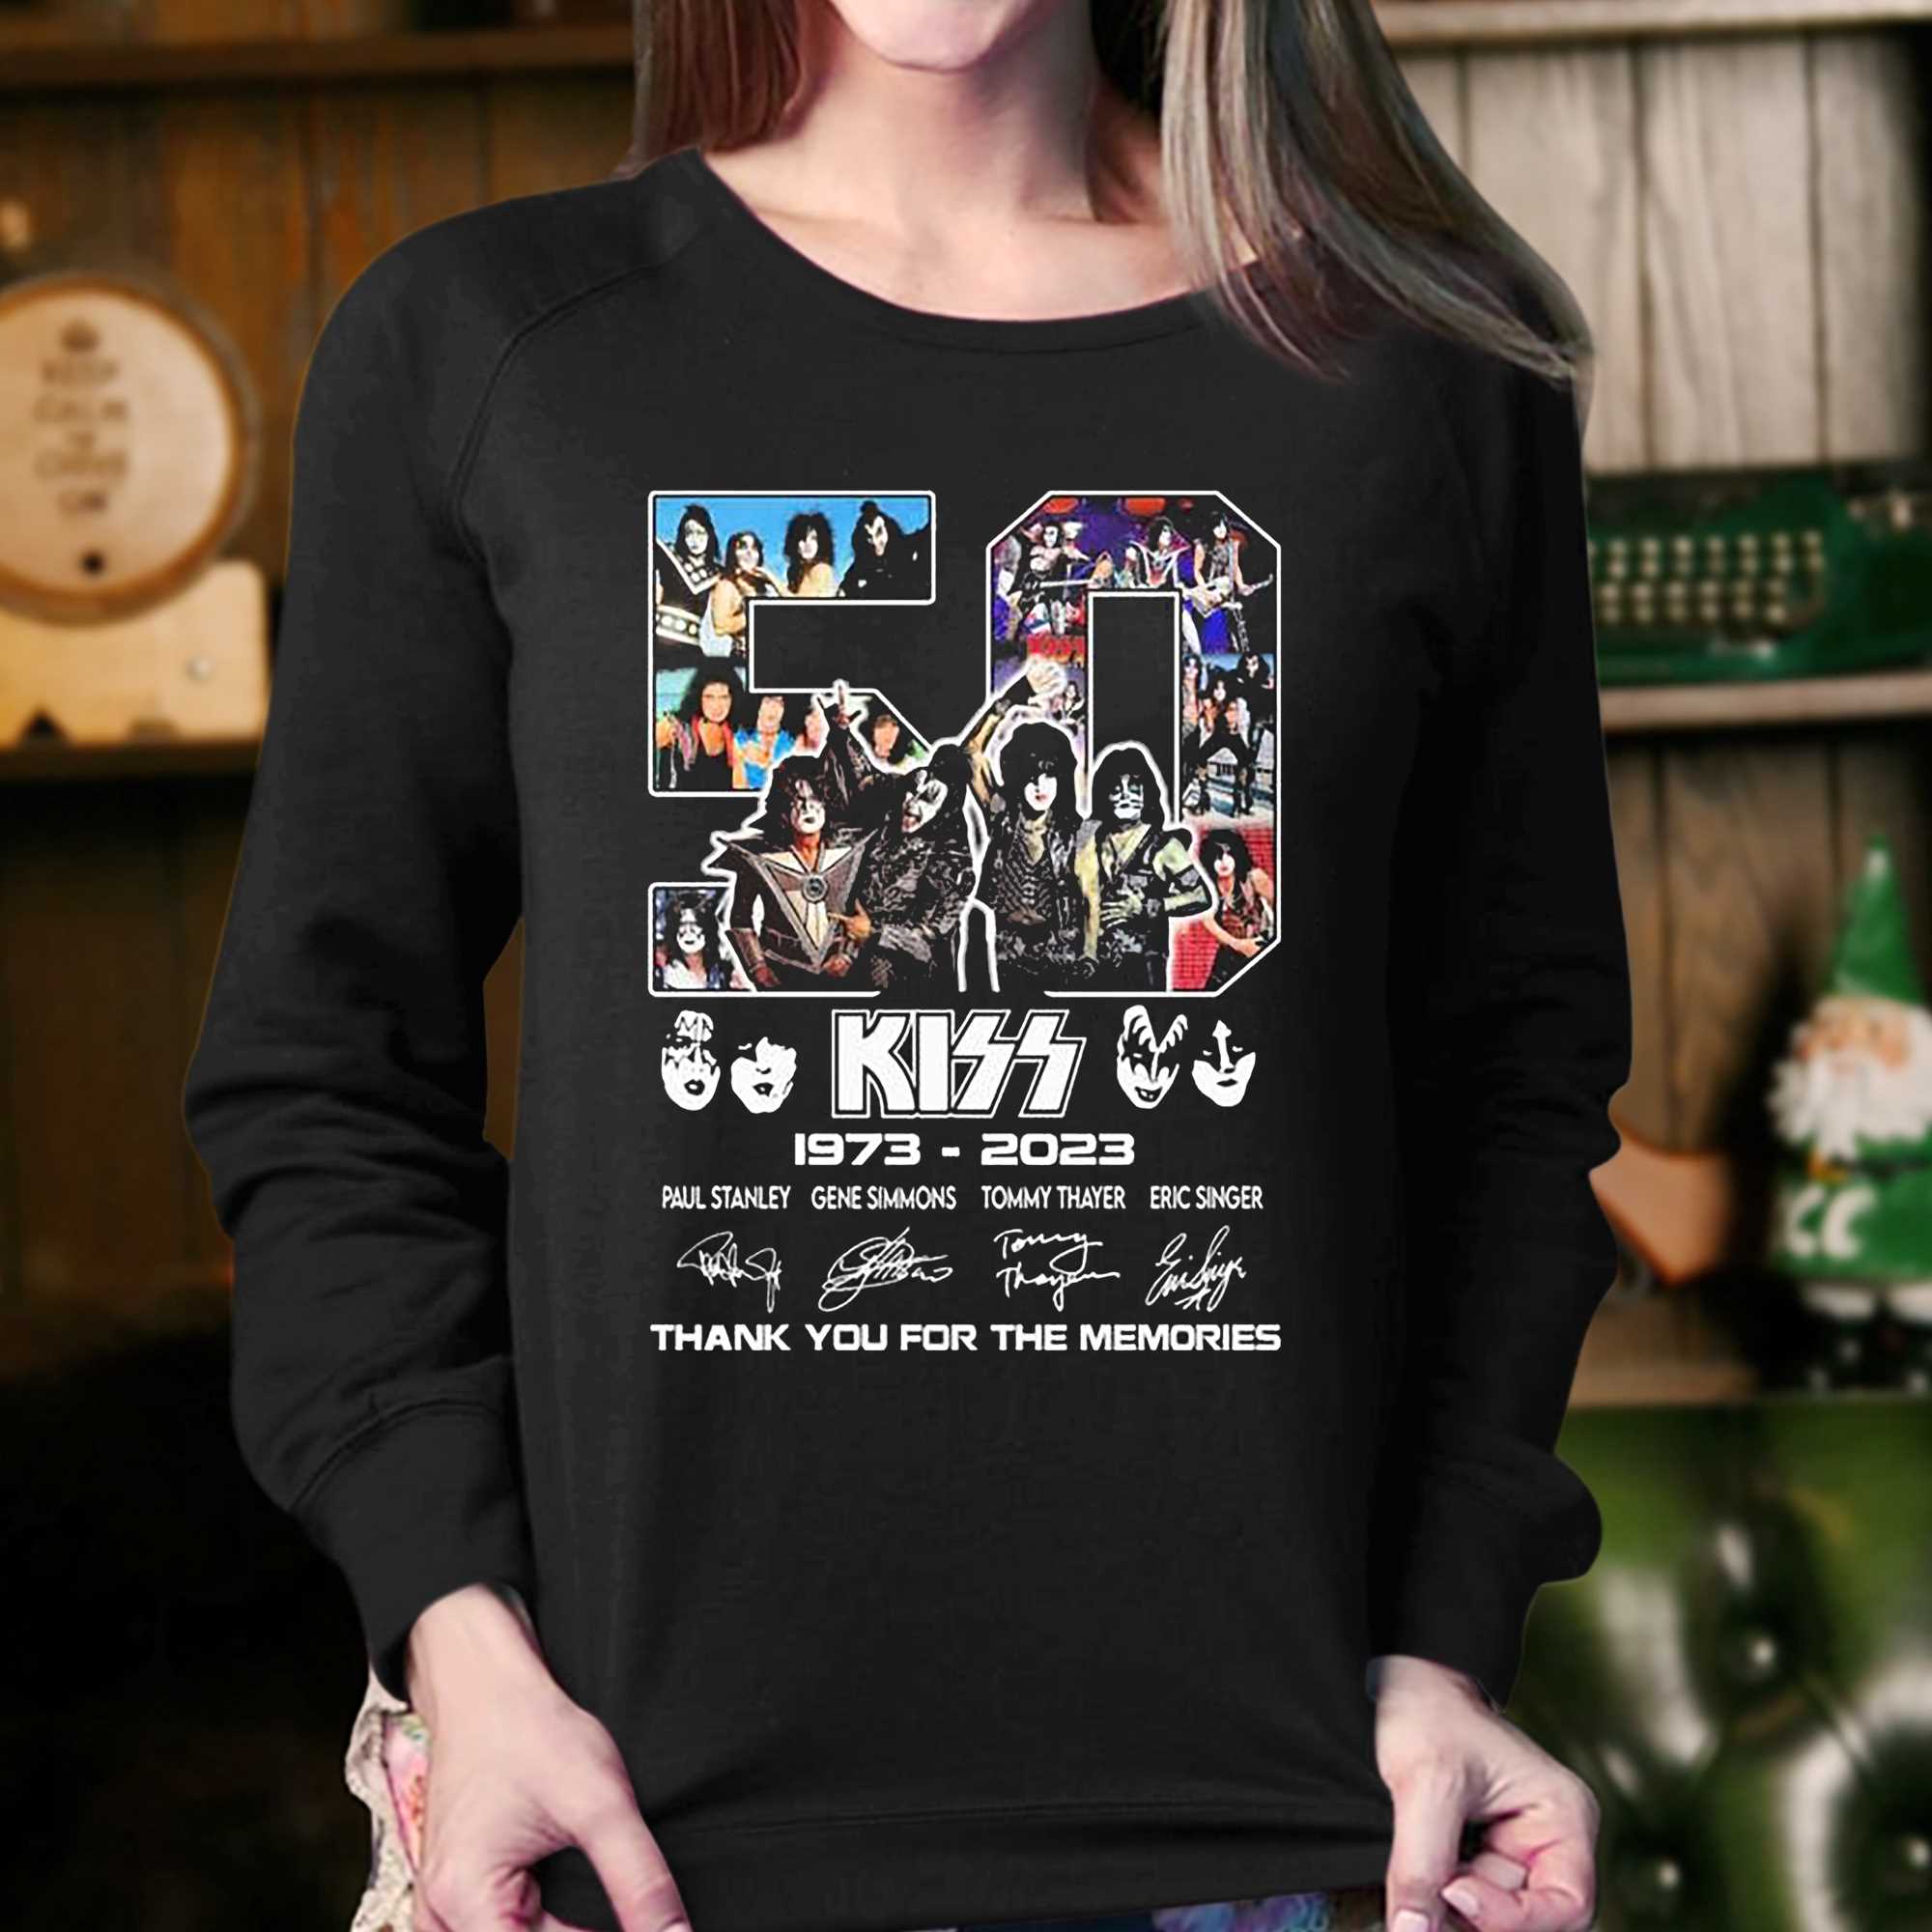 50 Years Of Kiss Band 1973-2023 Thank You For The Memories Signatures Shirt 